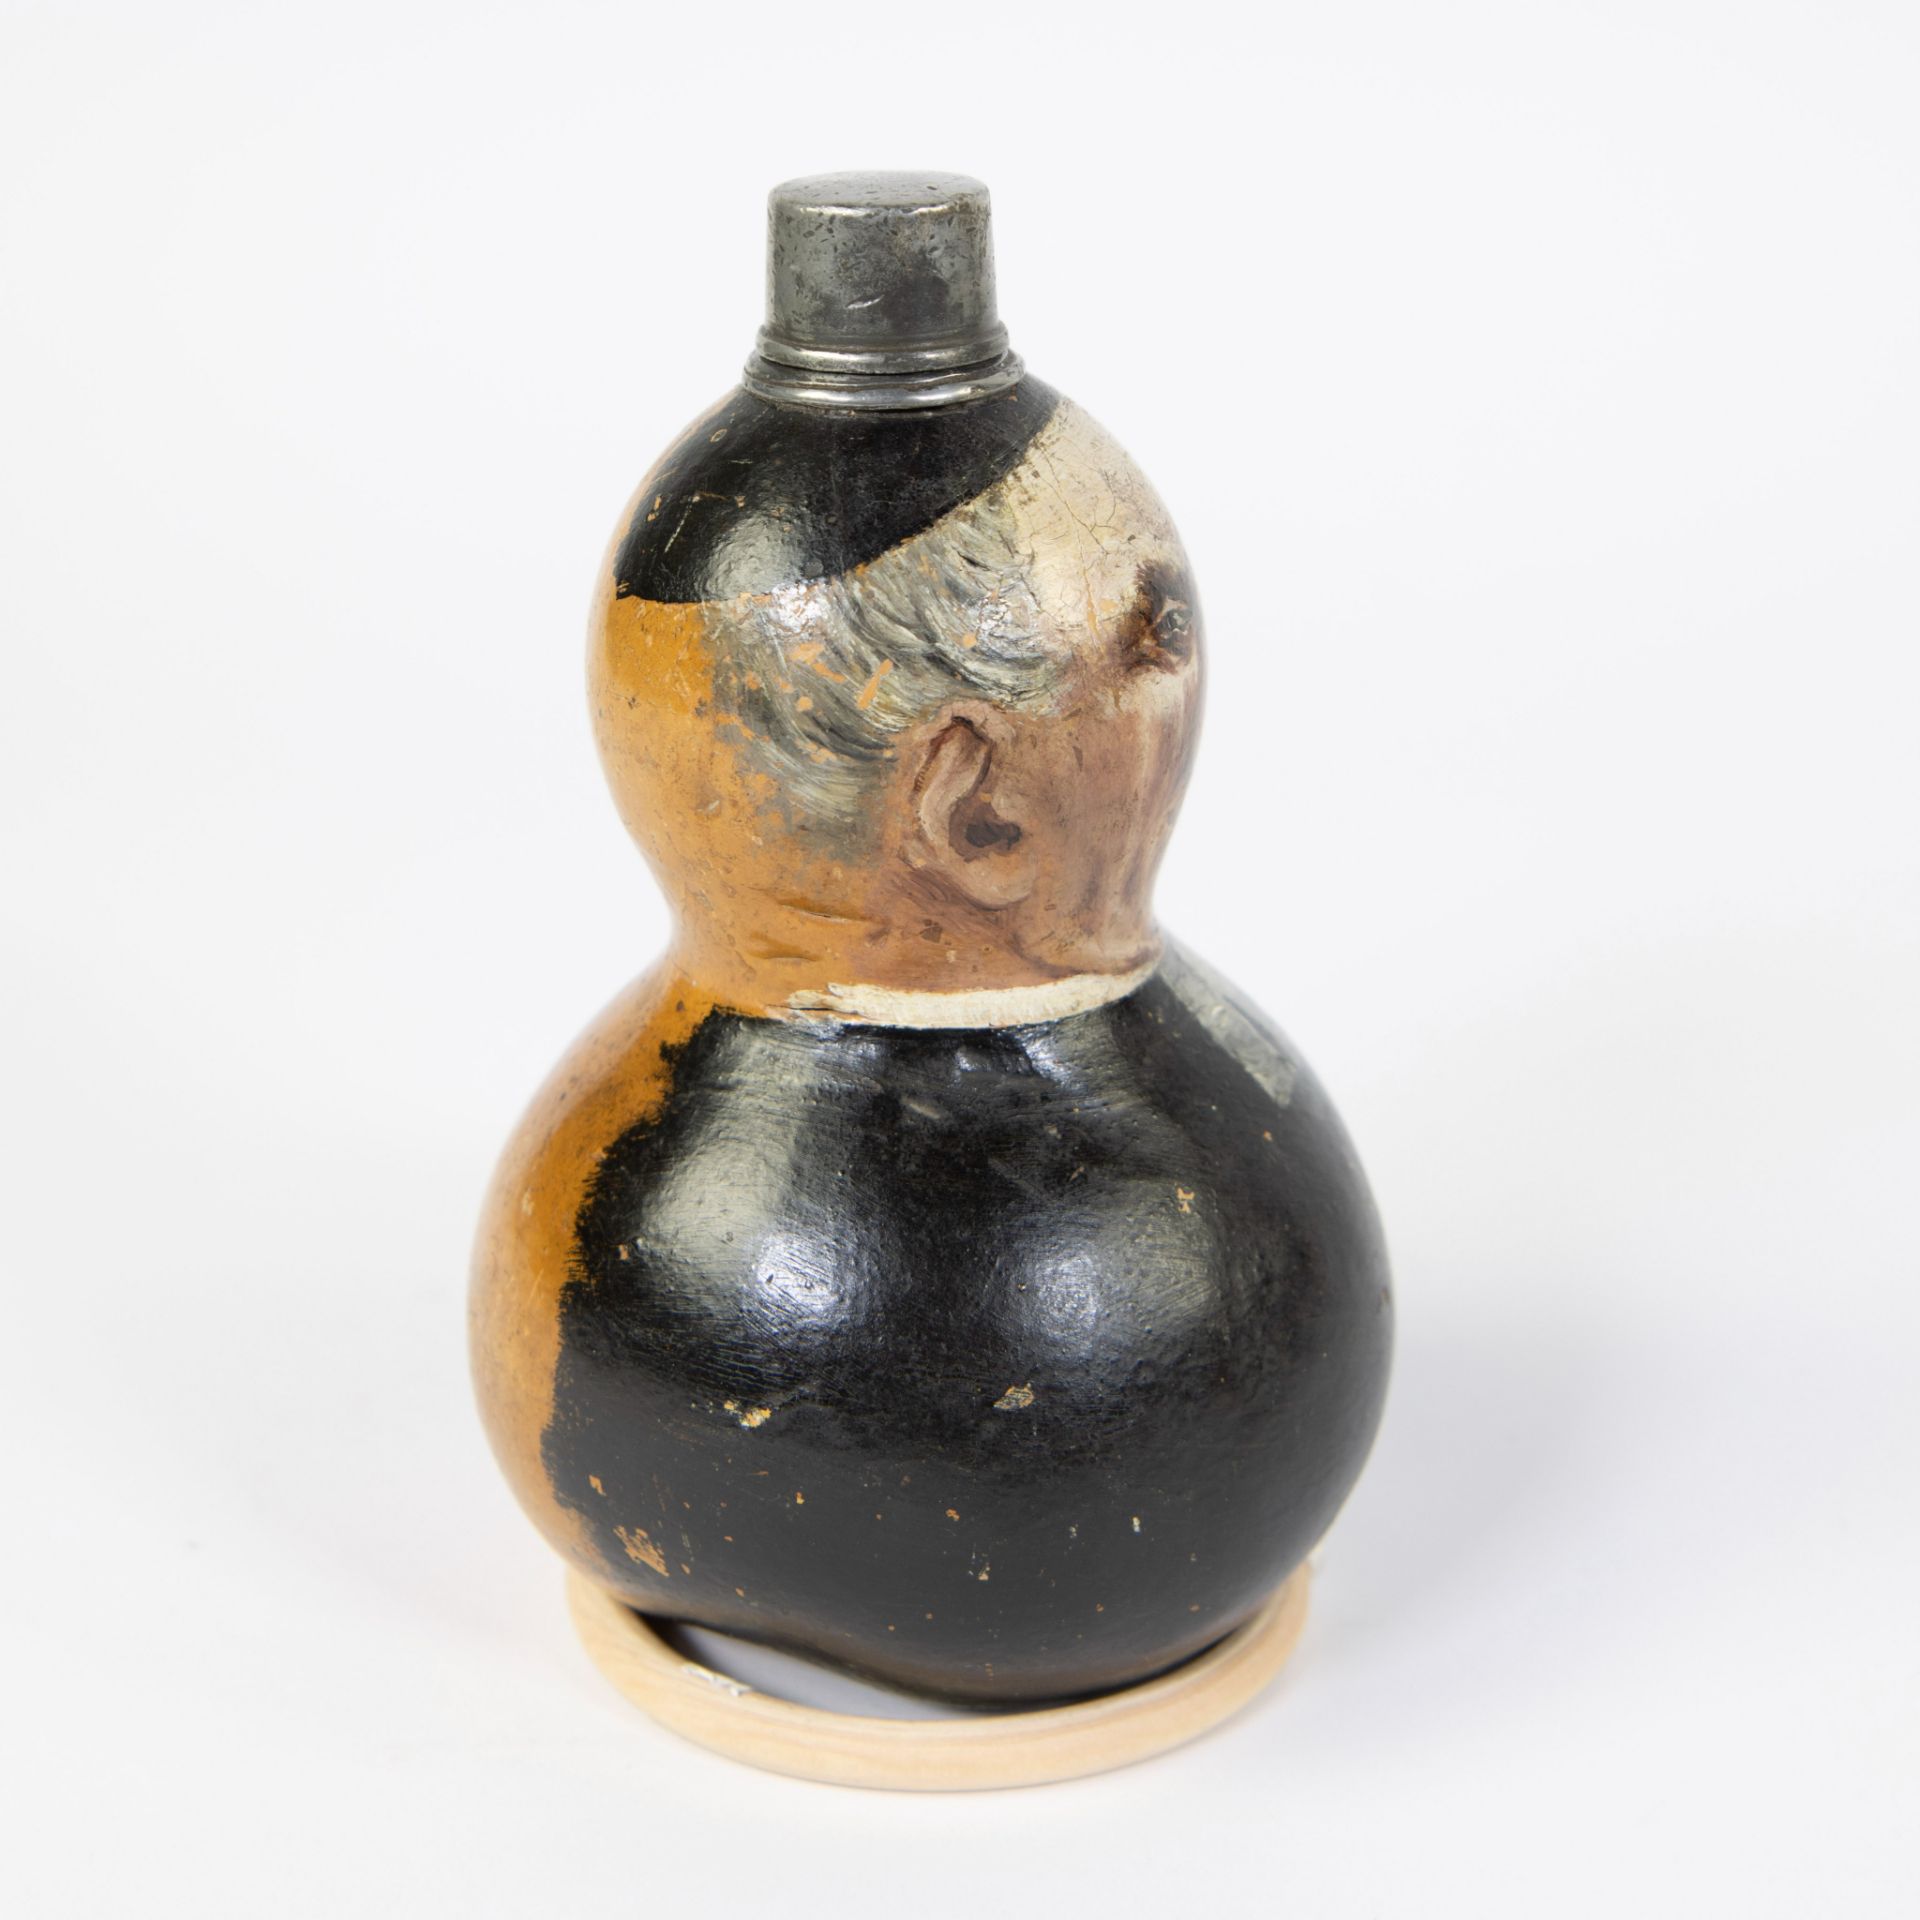 Lot of a rare gourd painted bottle with decor of a clergyman, pewter screw cap, French early 19th ce - Image 7 of 7